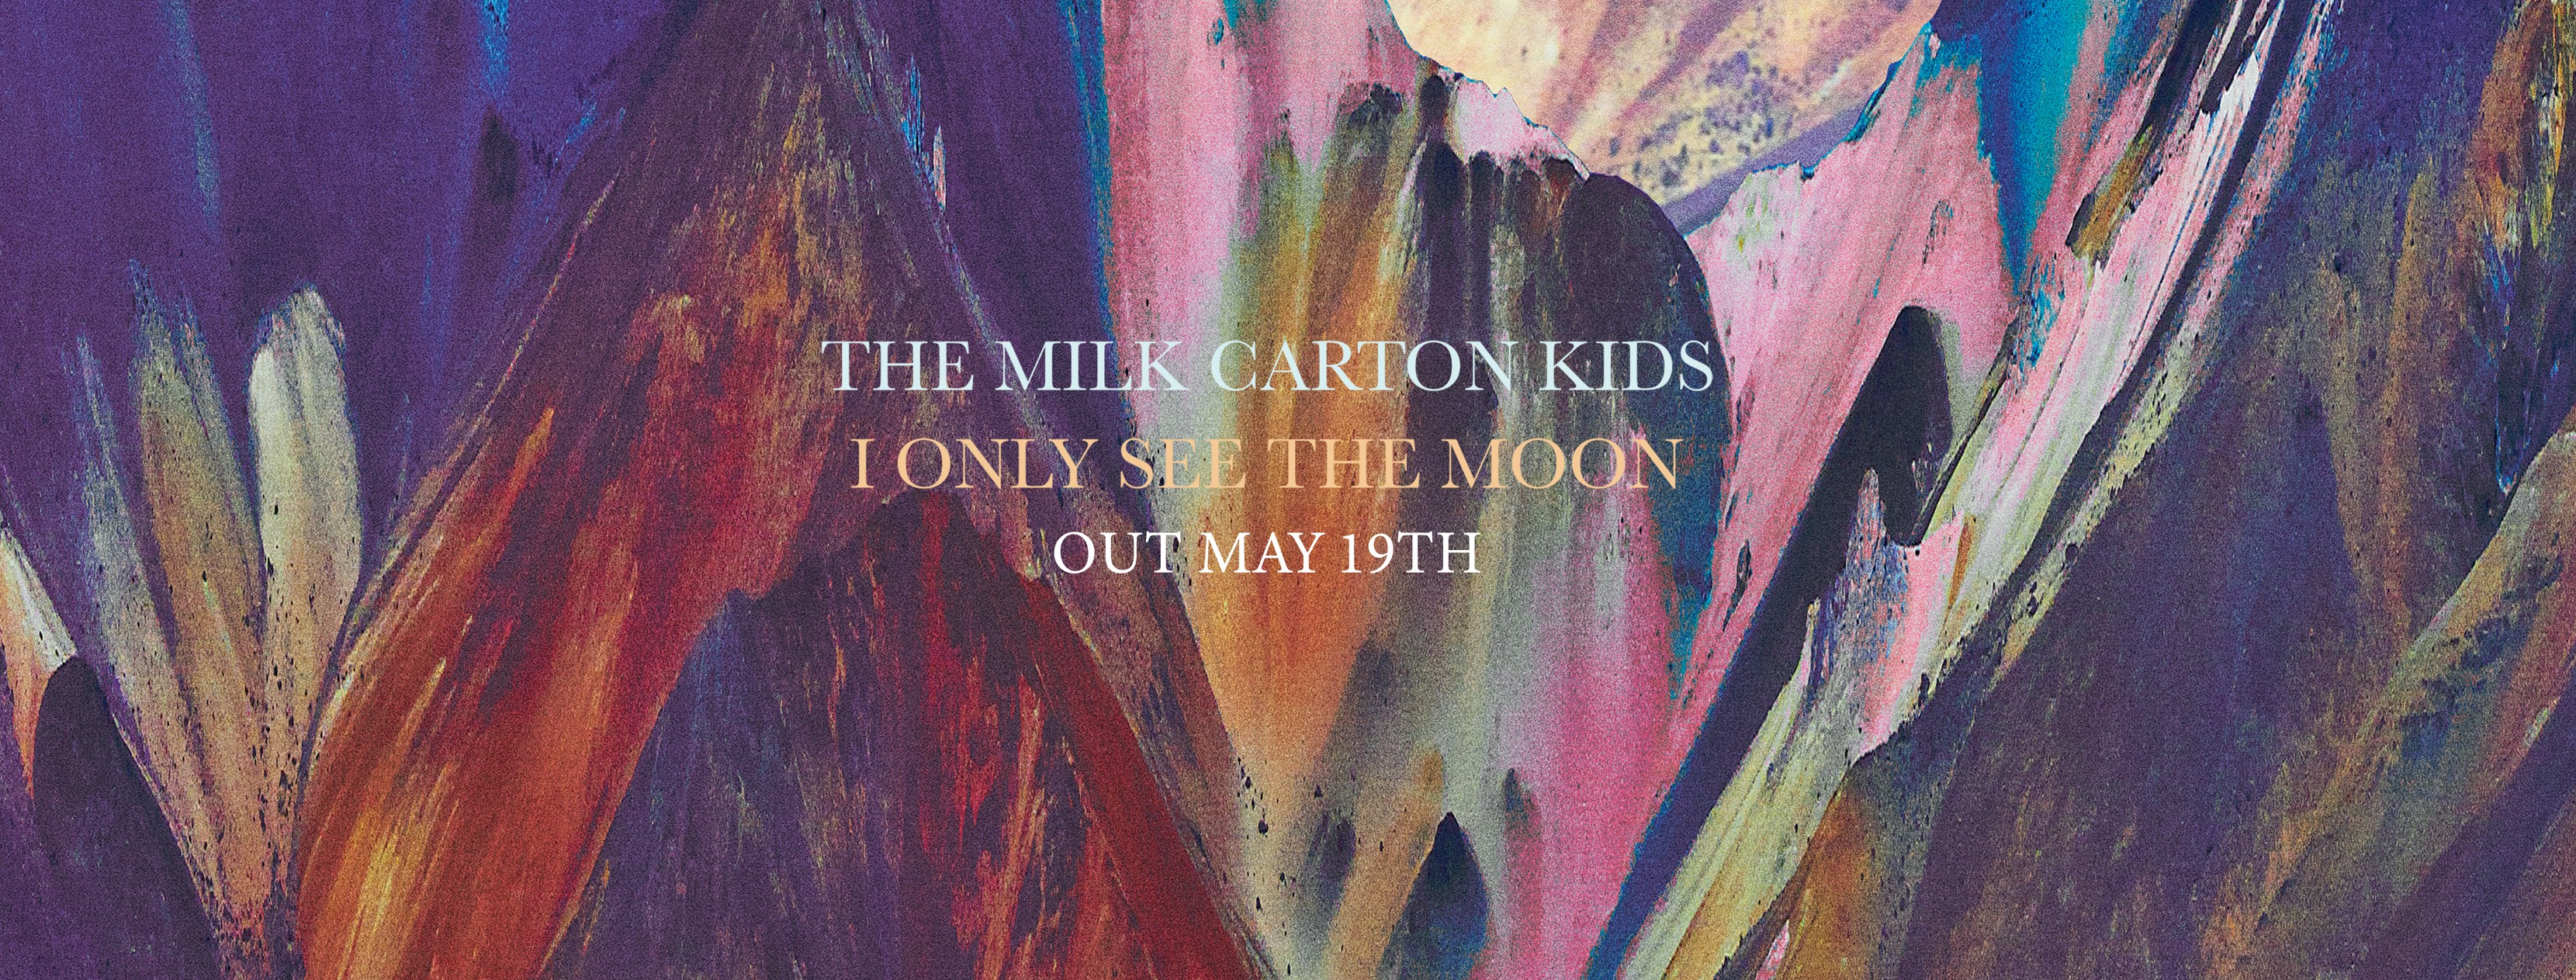 The Milk Carton Kids set North American tour dates in celebration of new record "I Only See The Moon," out now